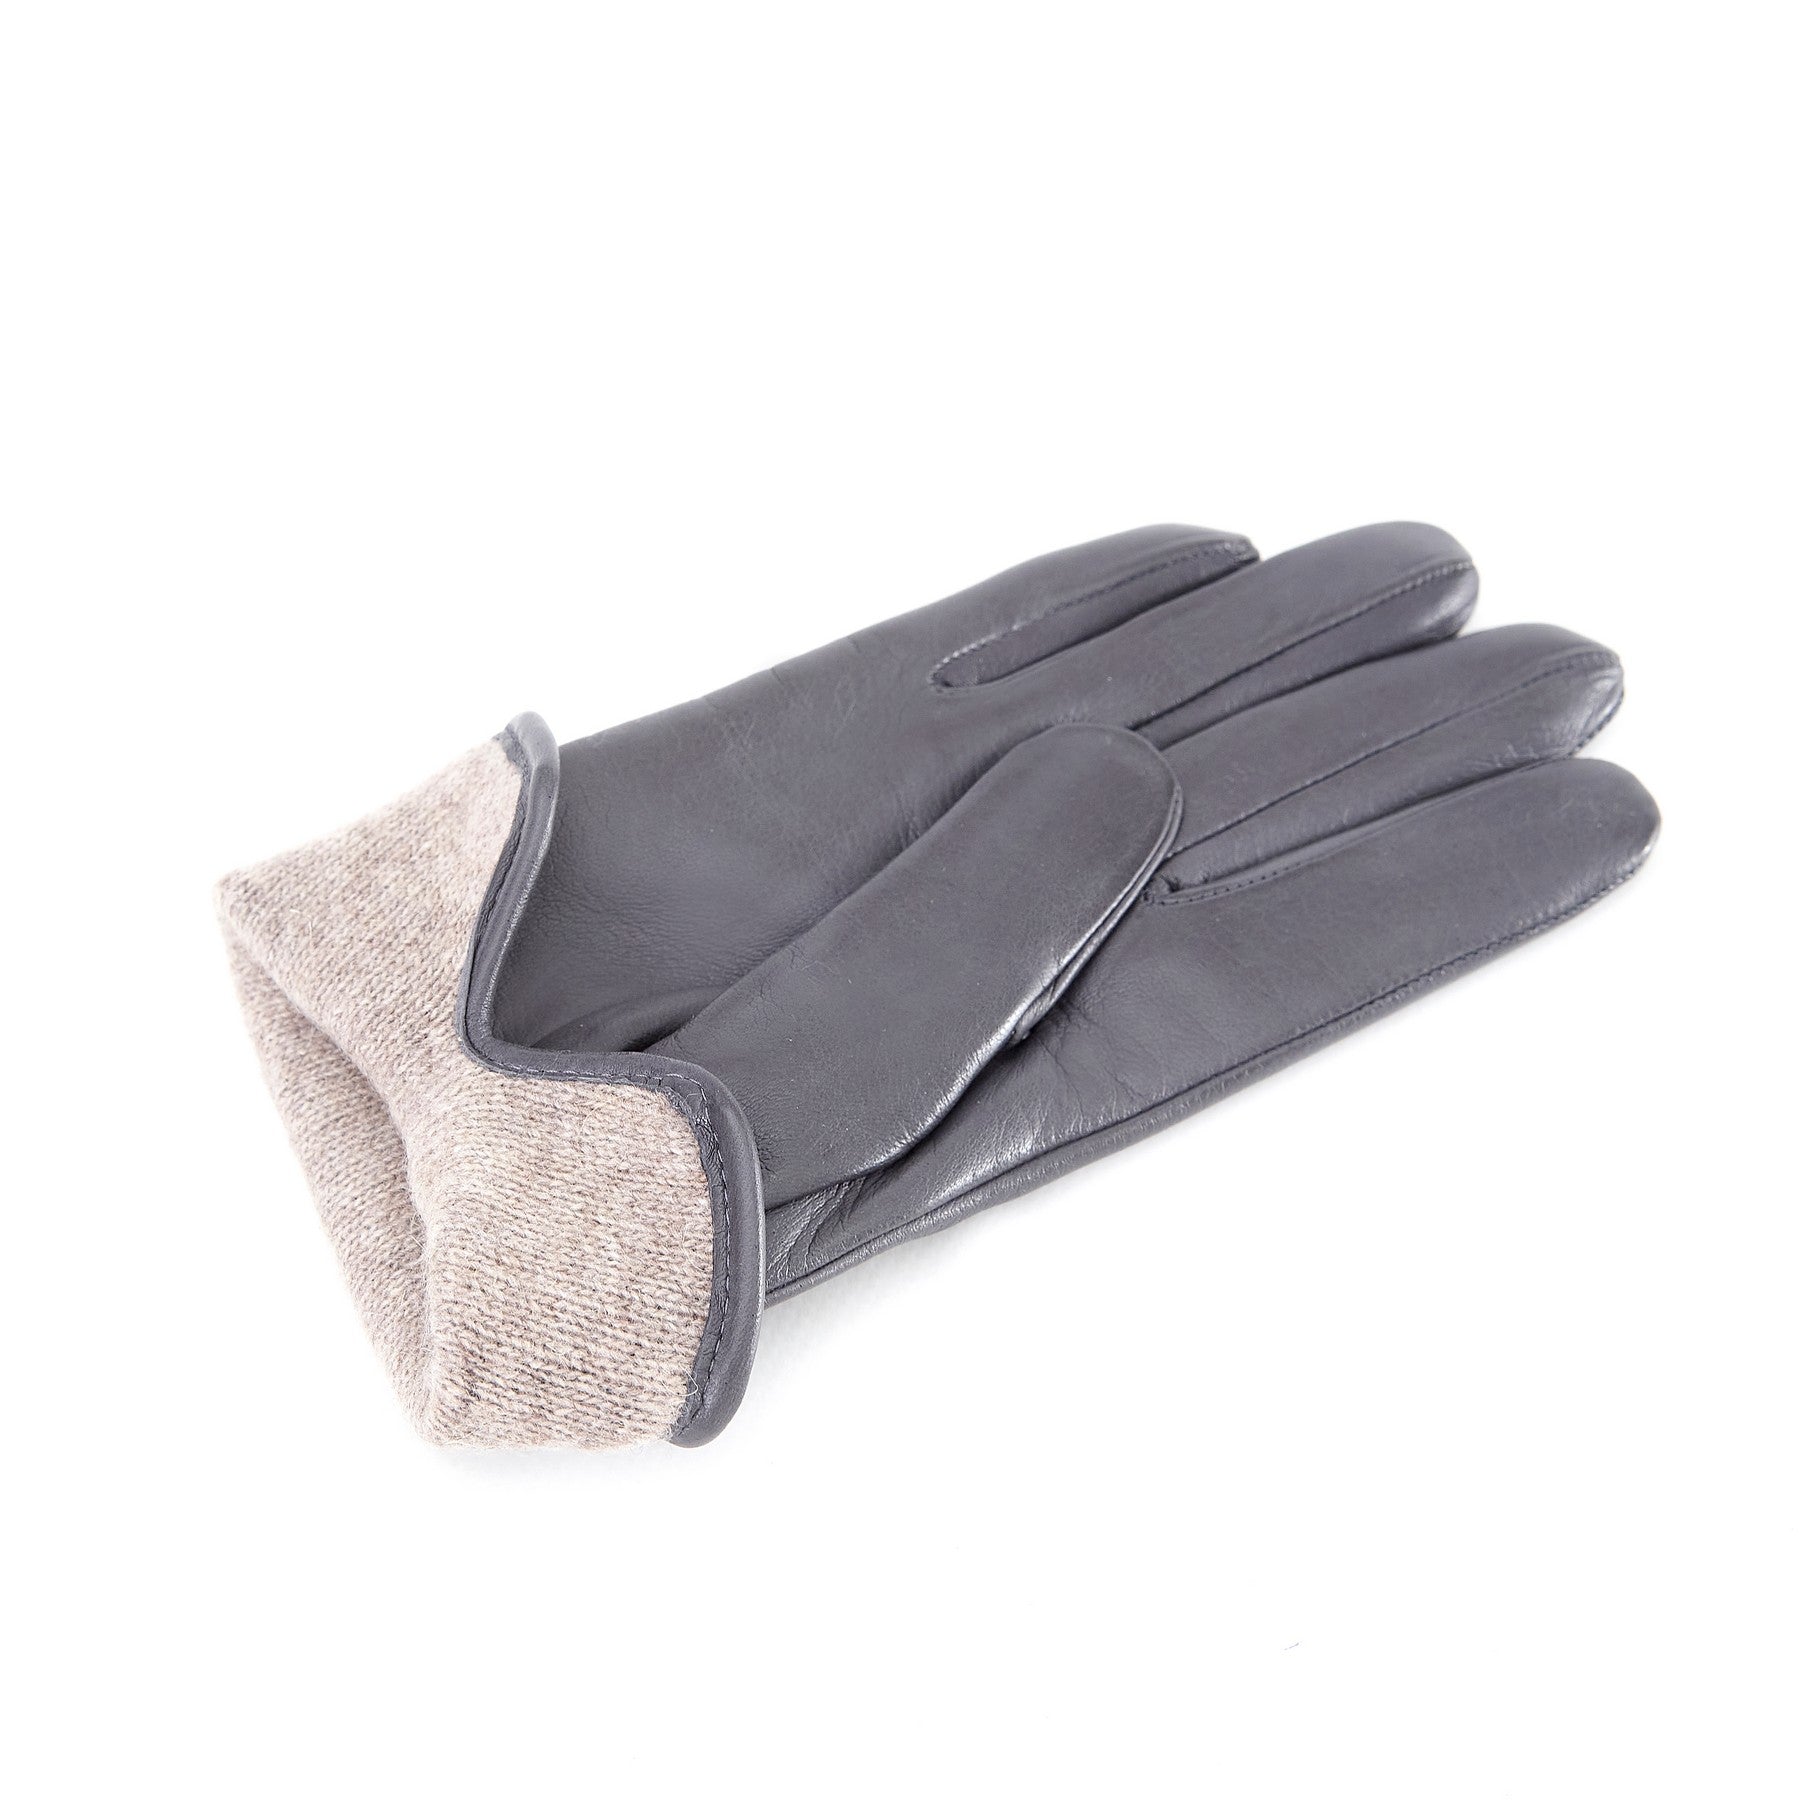 Women’s basic grey soft nappa leather gloves with palm opening and mix cashmere lining